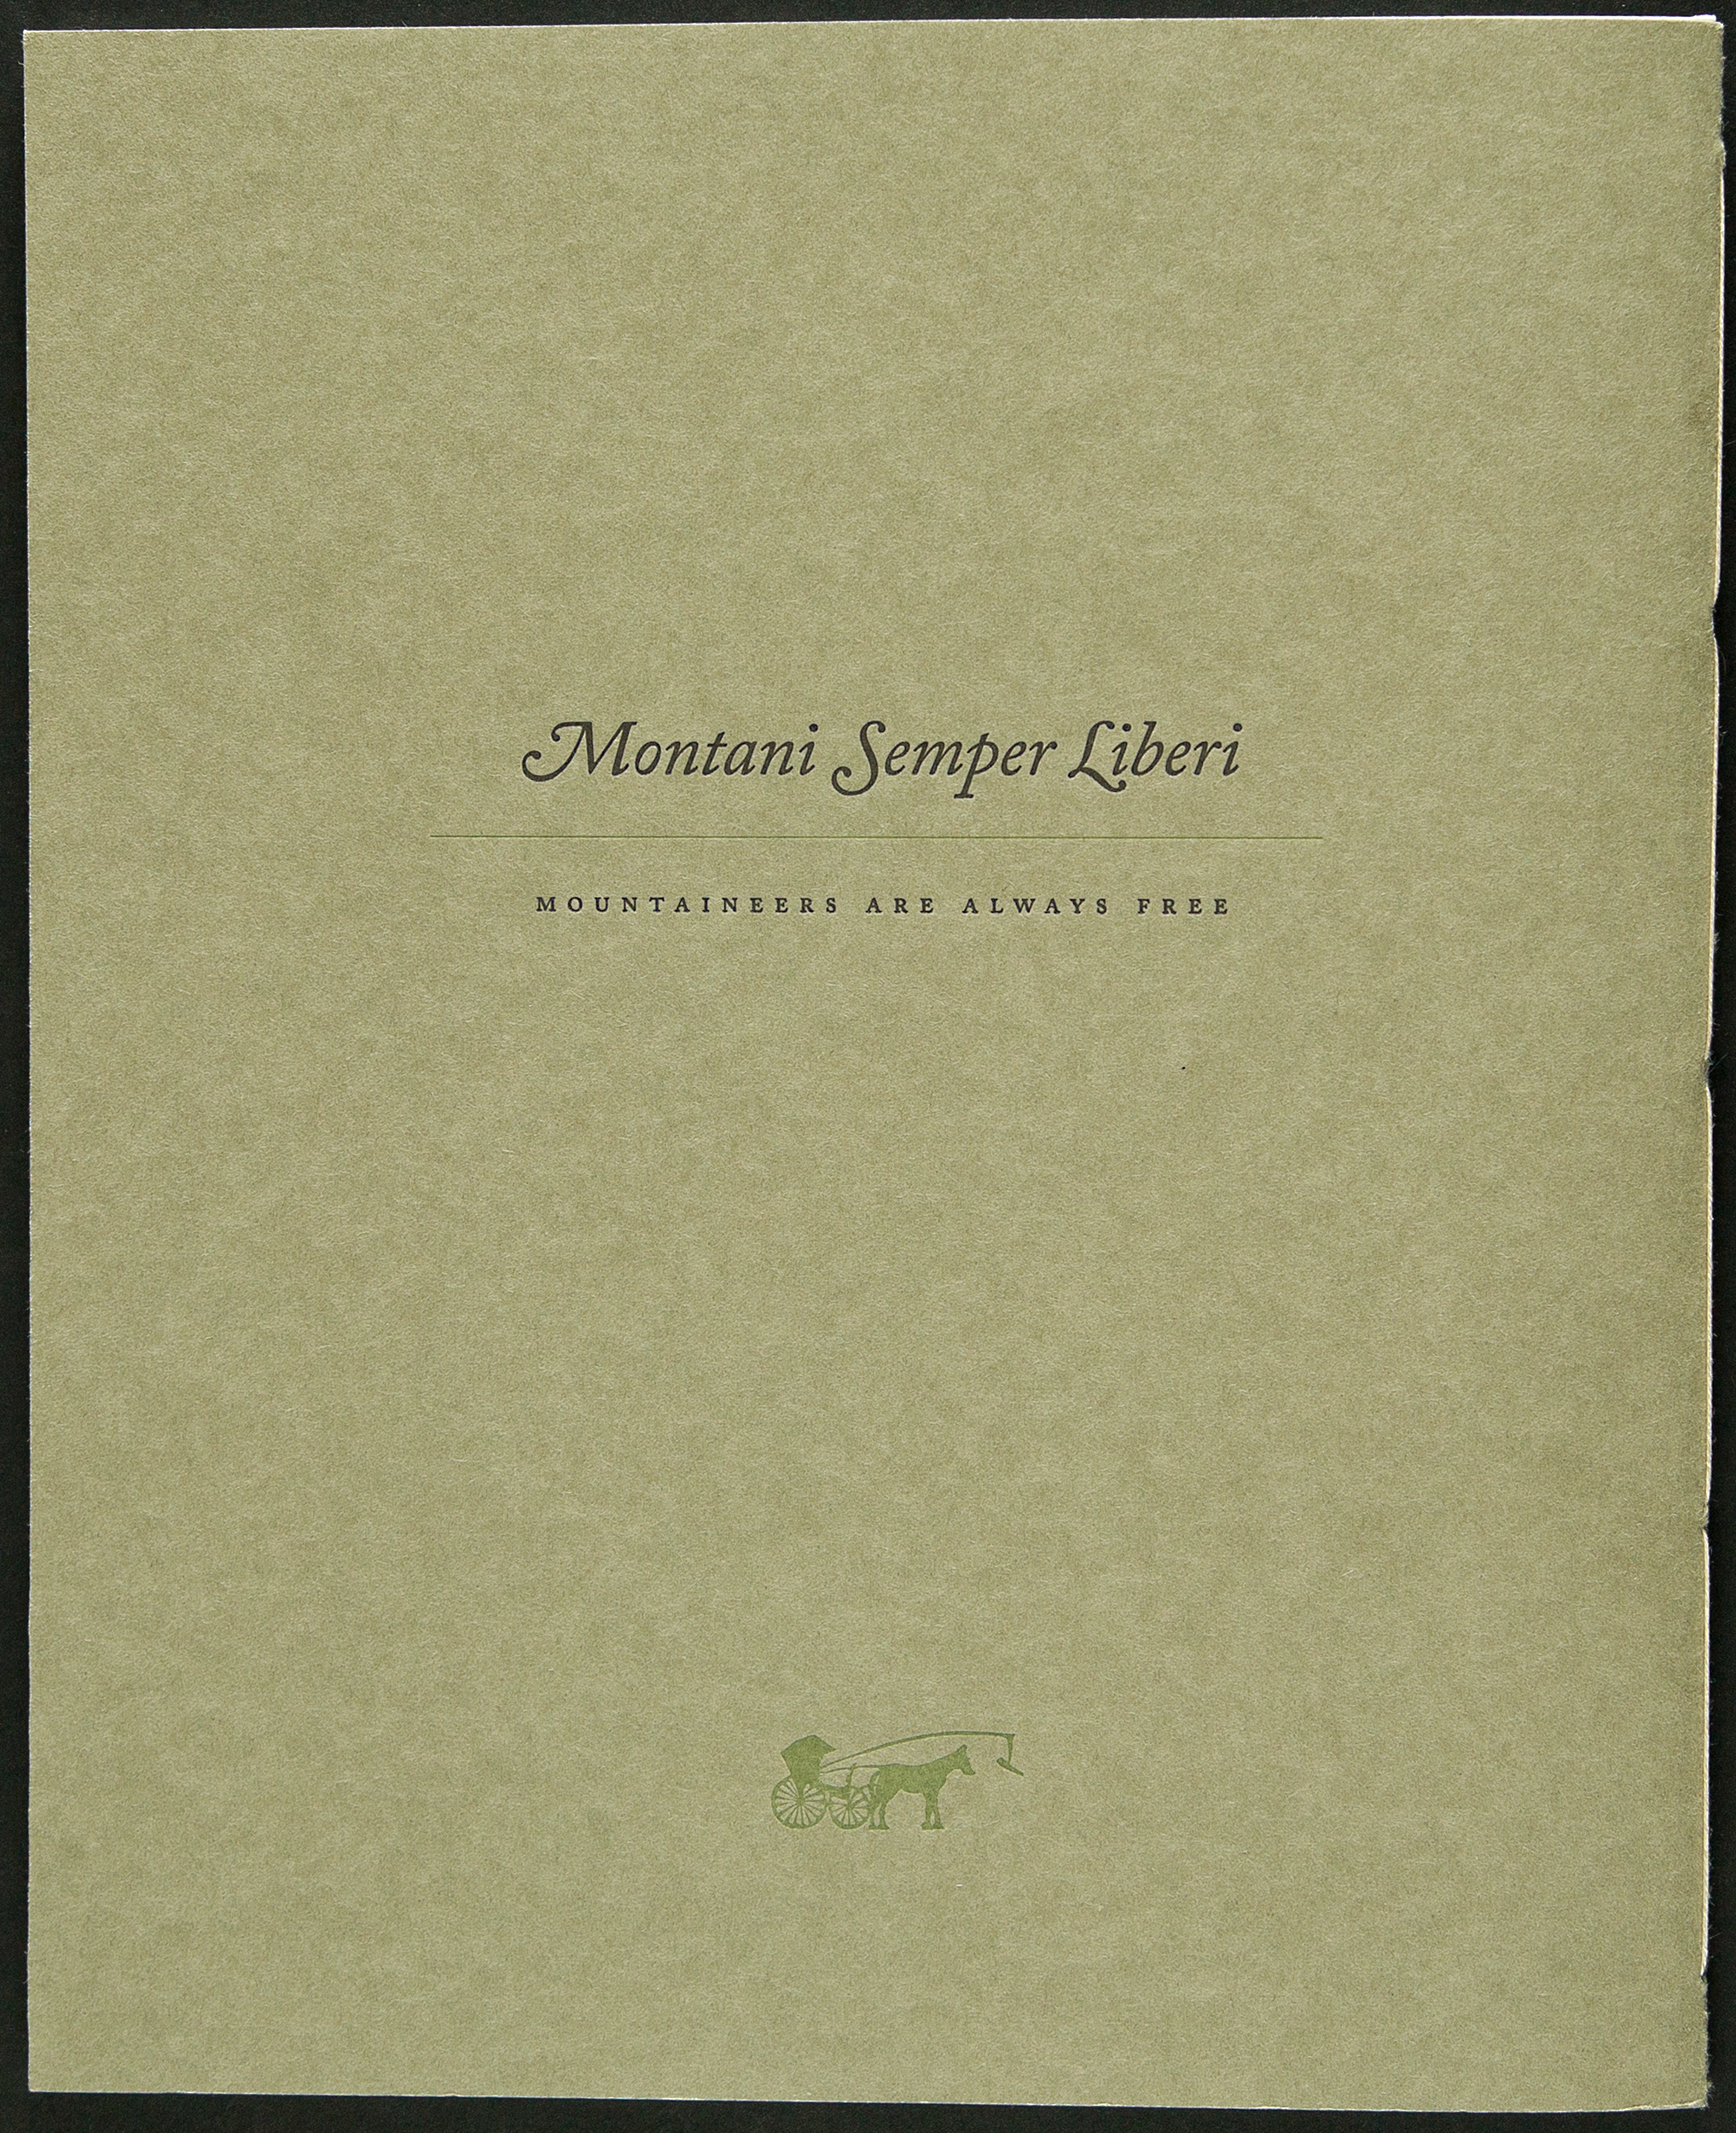  The back cover of volume one features the state motto of West Virginia. Volume 2 carries the state motto of Kentucky.&nbsp; 